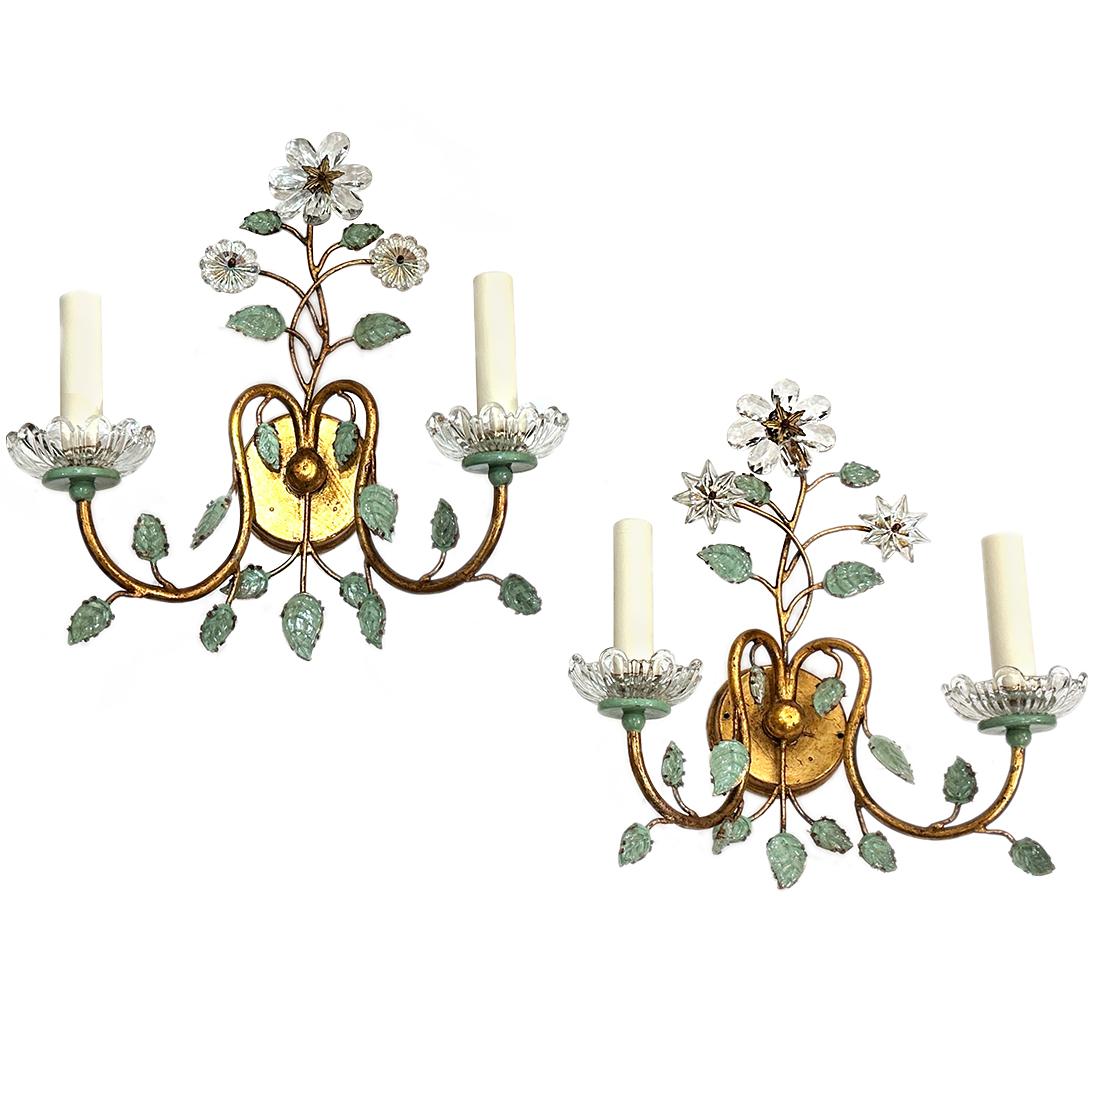 A set of four circa 1950's French gilt metal sconces with verdigris, molded glass leaves and crystal flowers. Sold in pairs.

Measurements:
Height: 14